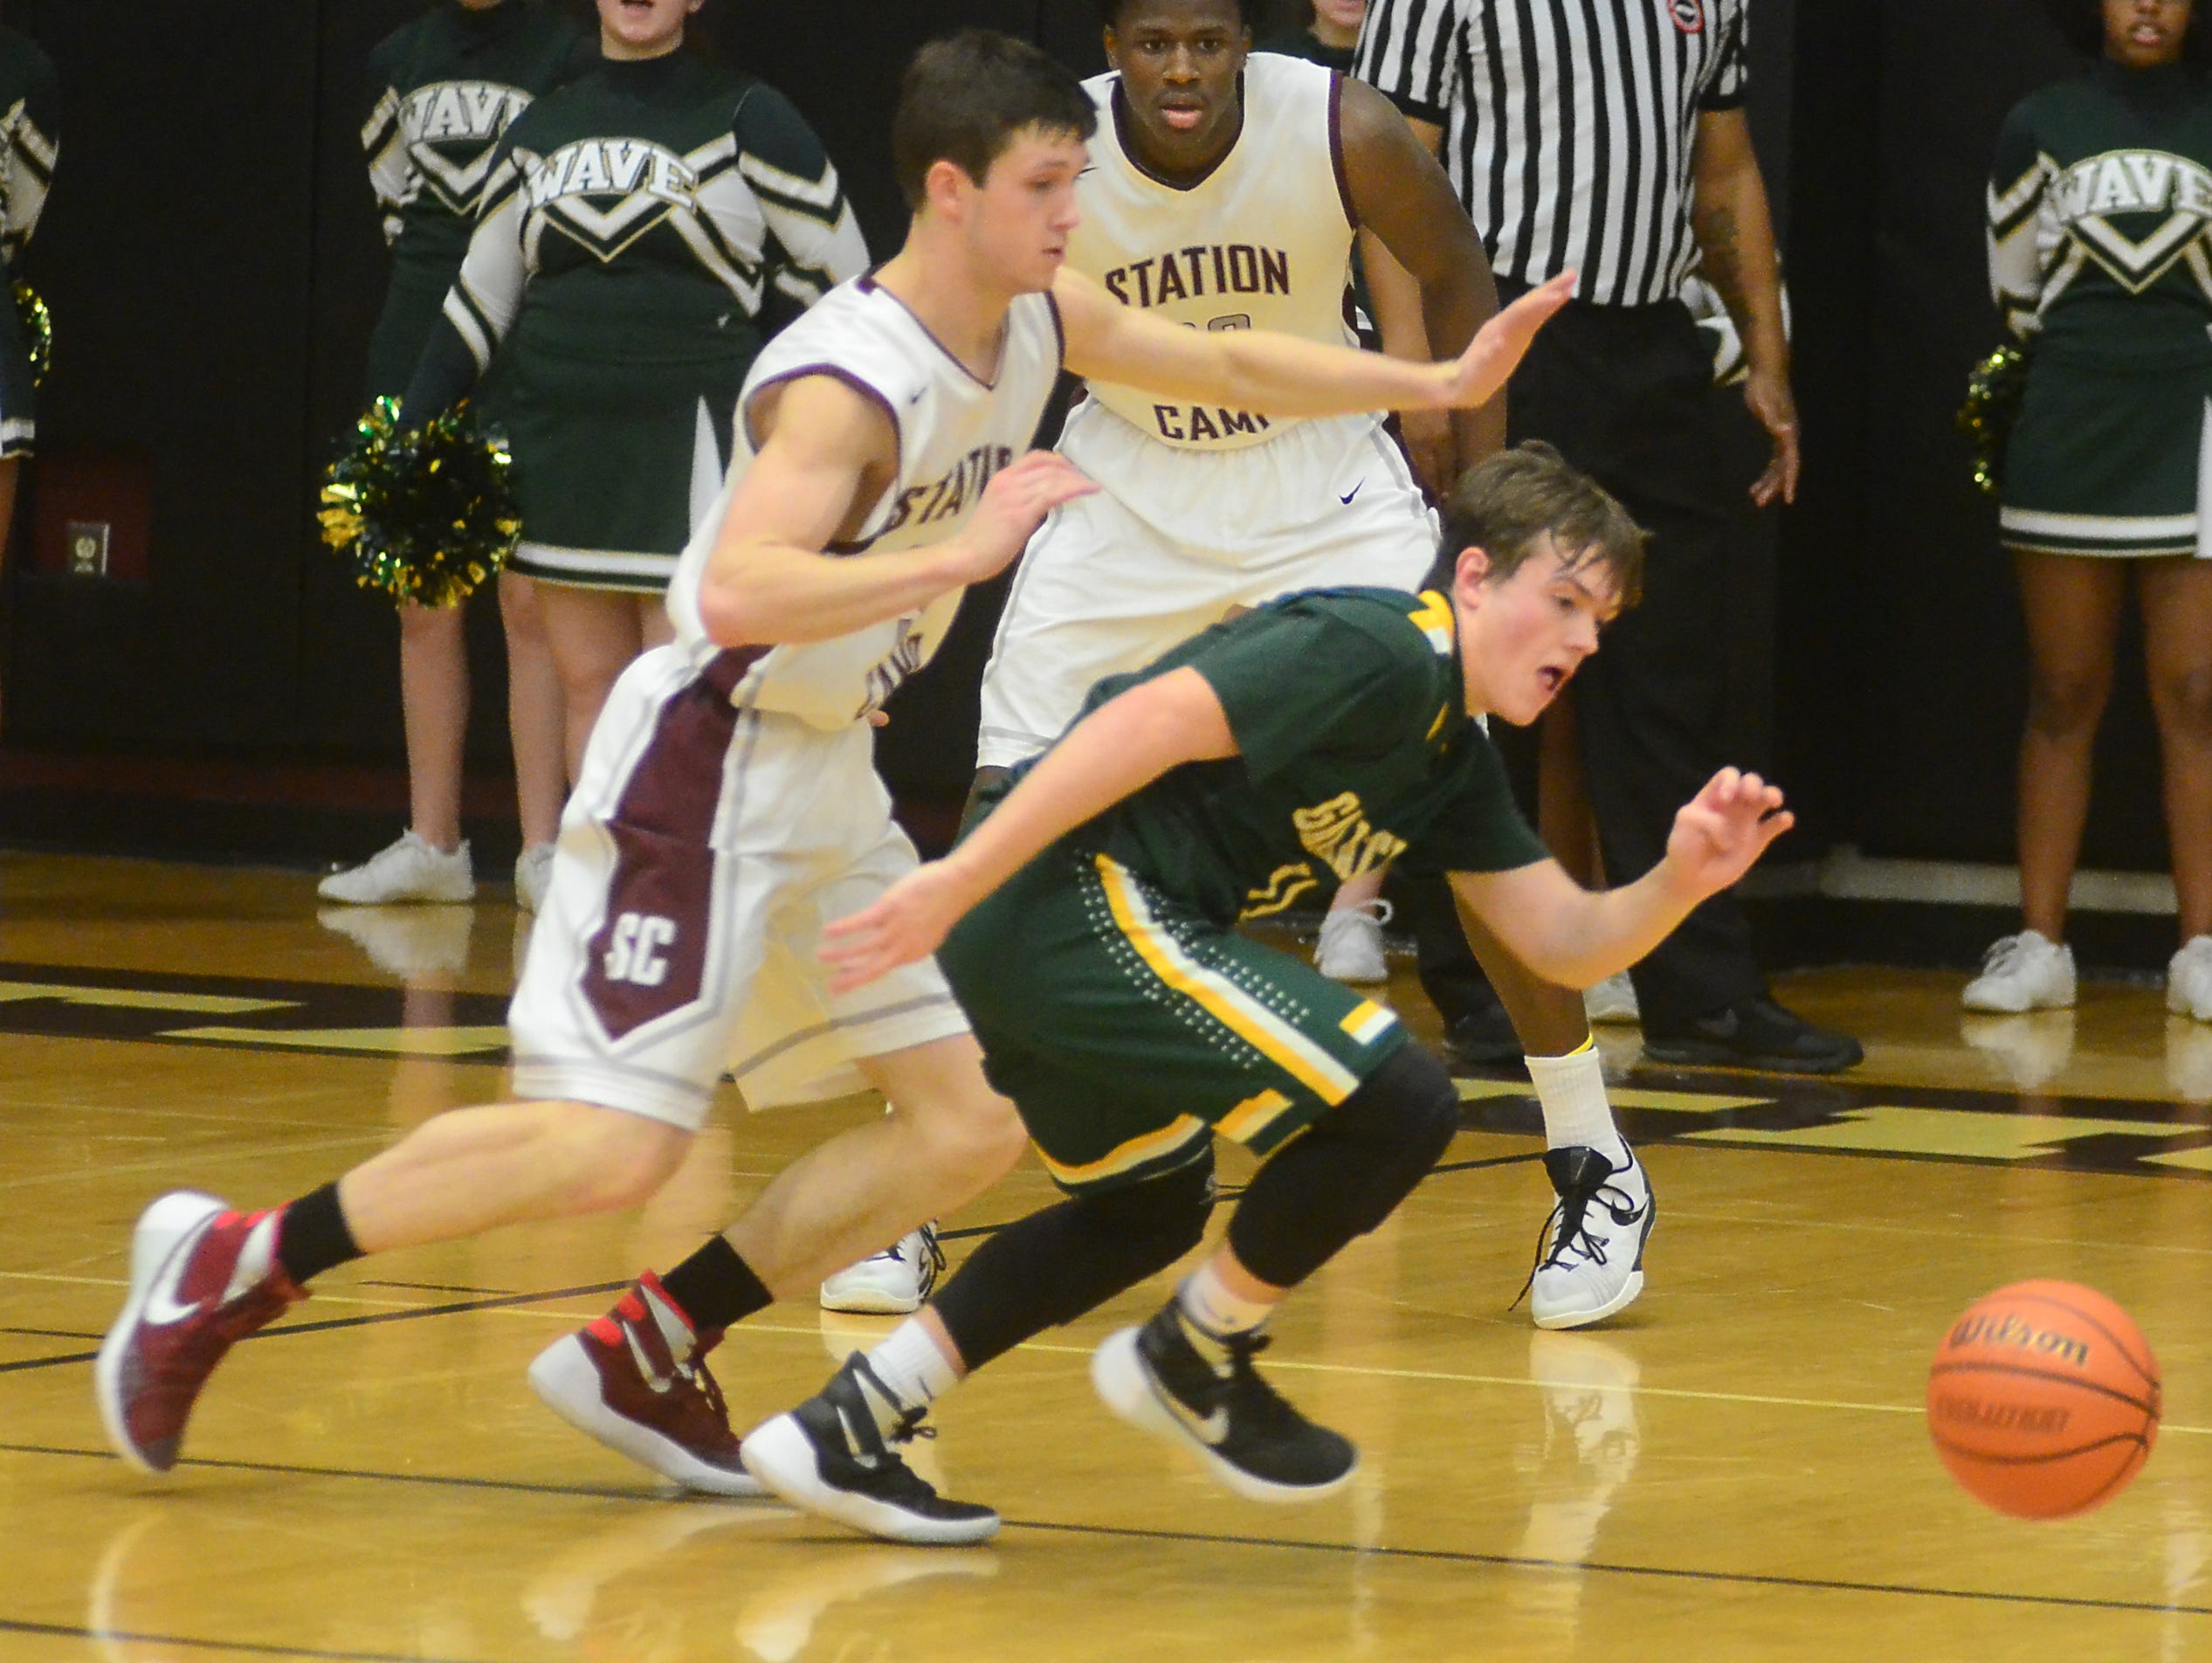 Gallatin High sophomore guard Collin Minor scrambles for a loose ball as Station Camp senior Sawyer Taylor pursues during fourth-quarter action. Minor scored a team-high 15 points.